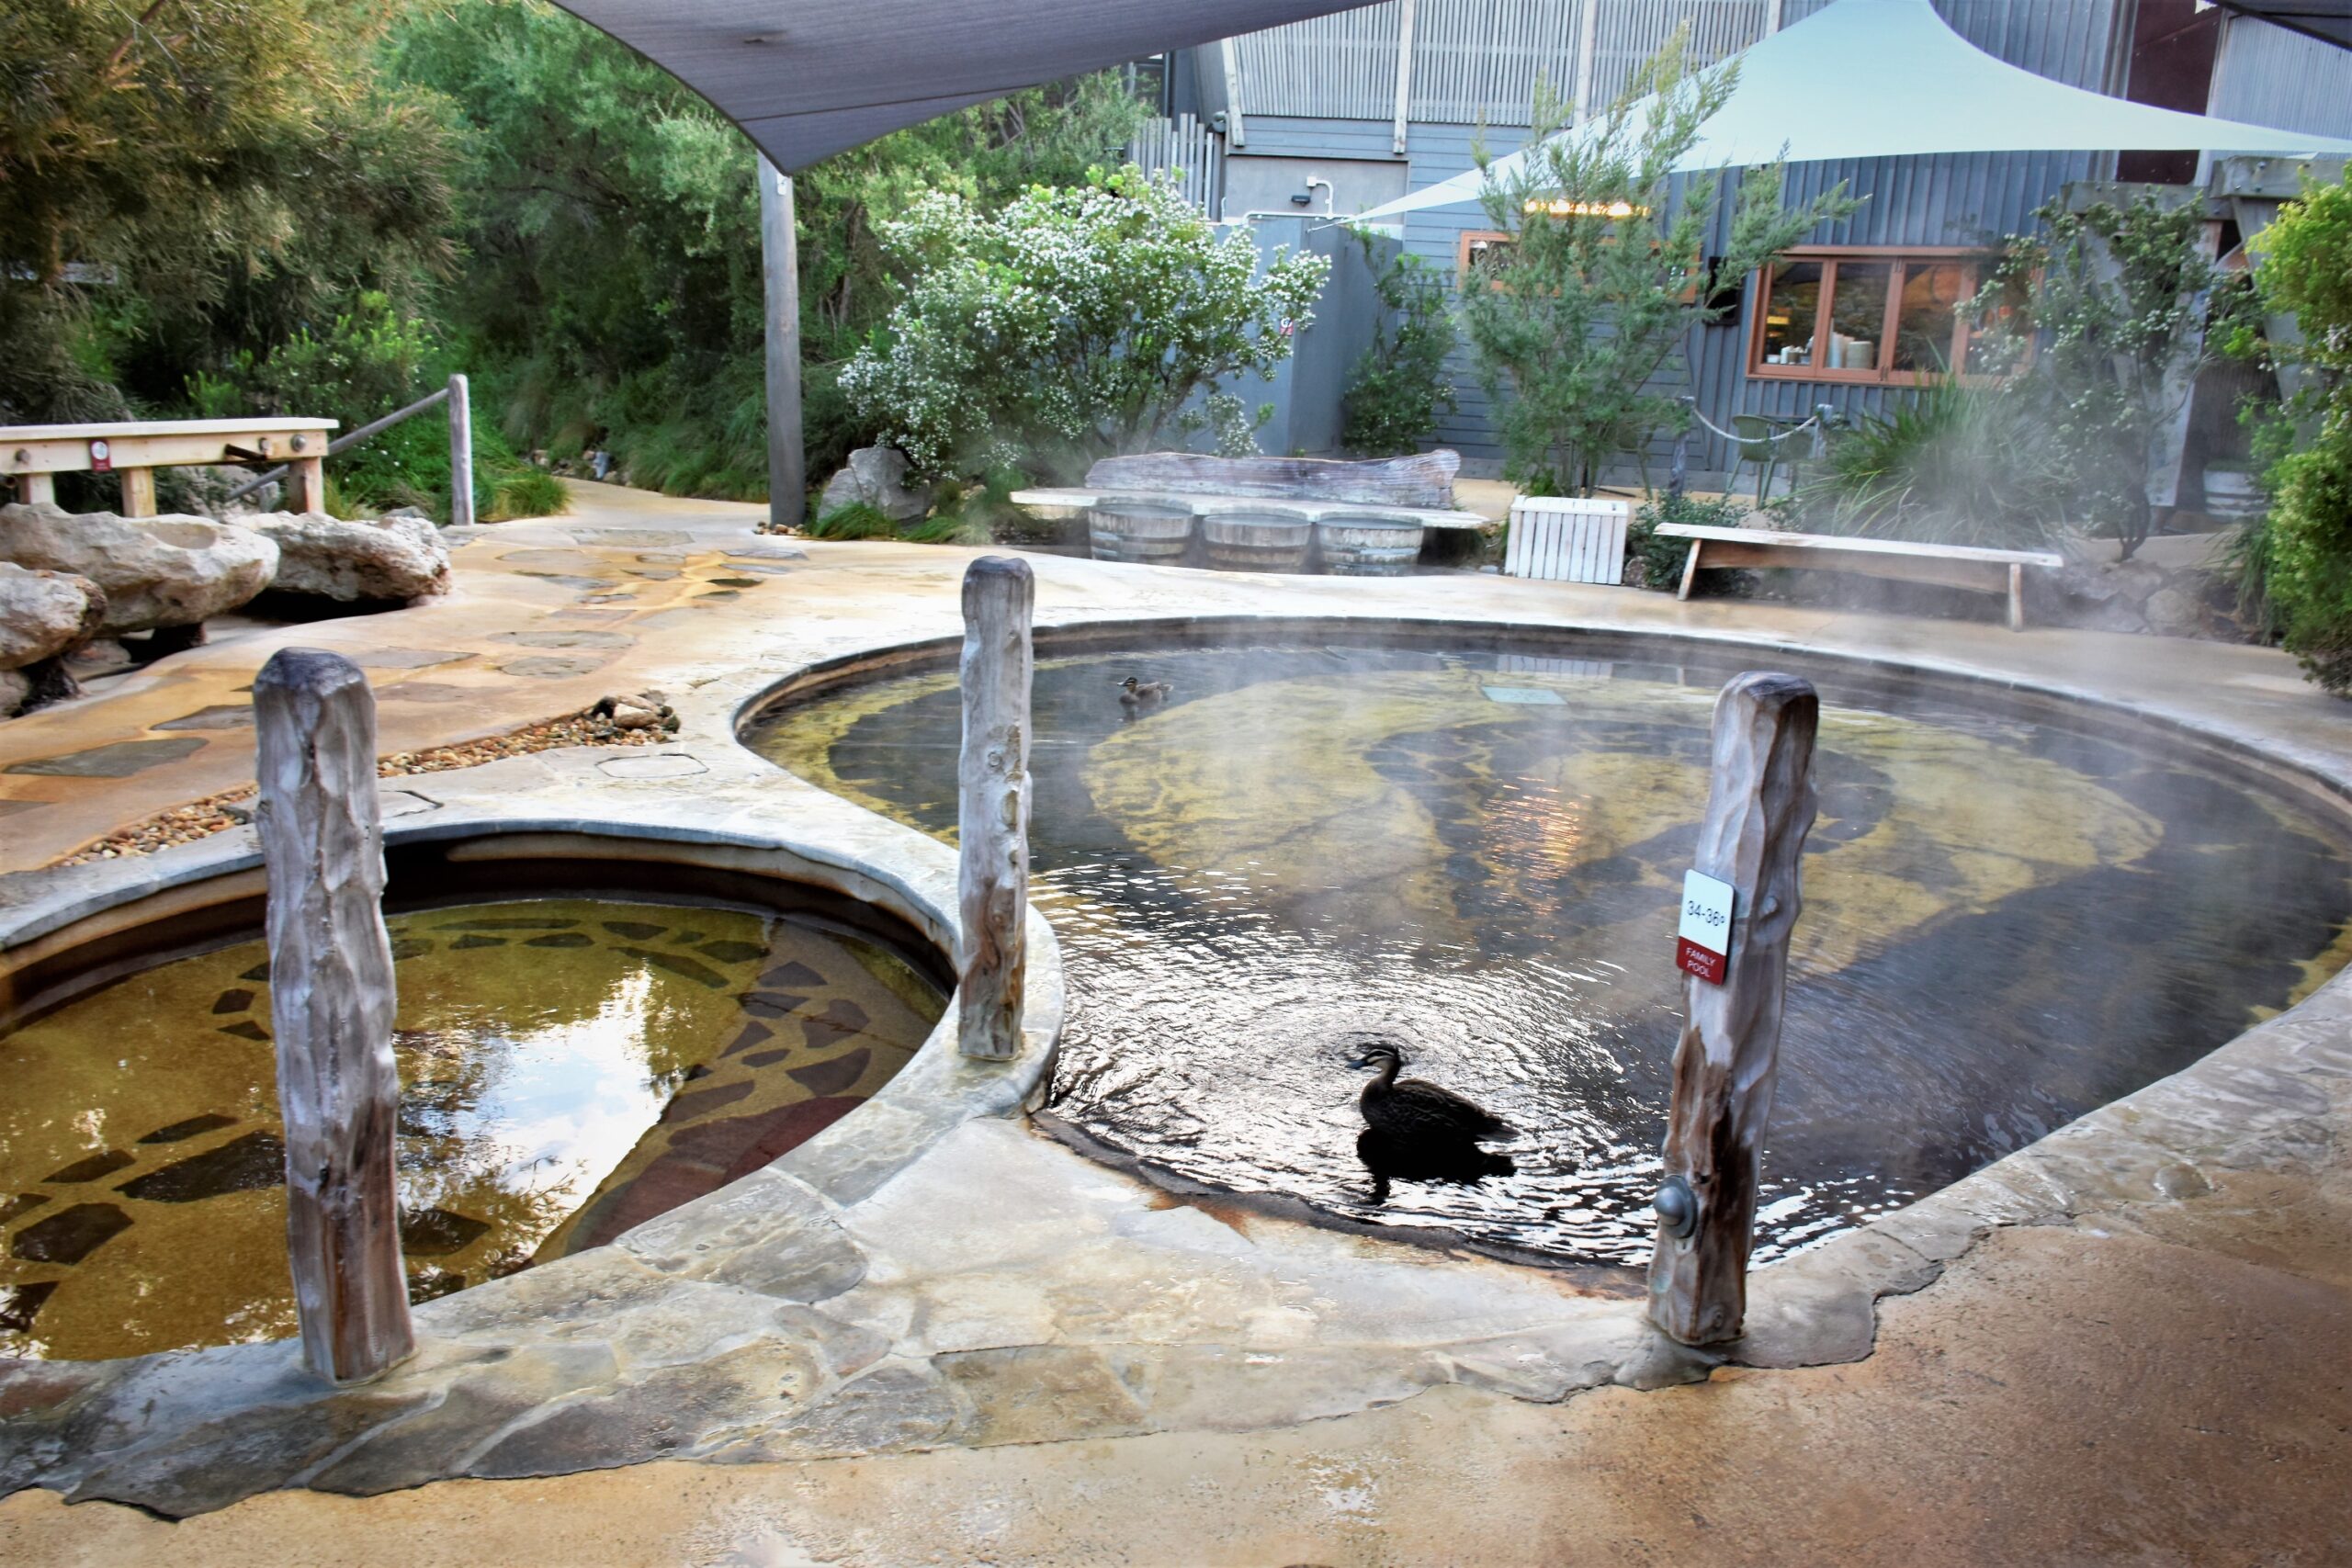 Some circular pools with hot springs. A duck is sitting in one of them.